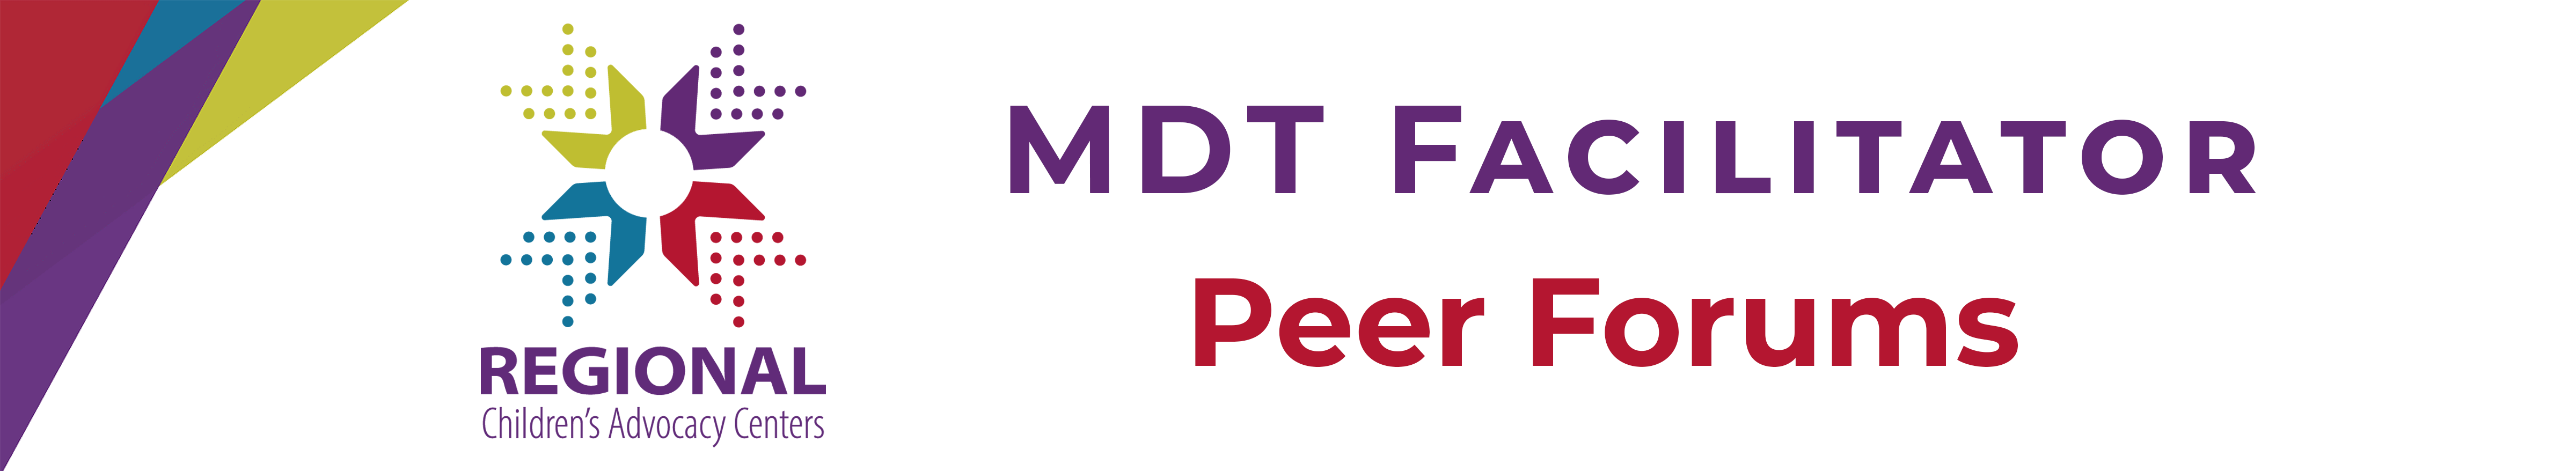 MDT Peer Forum title with RCAC logo